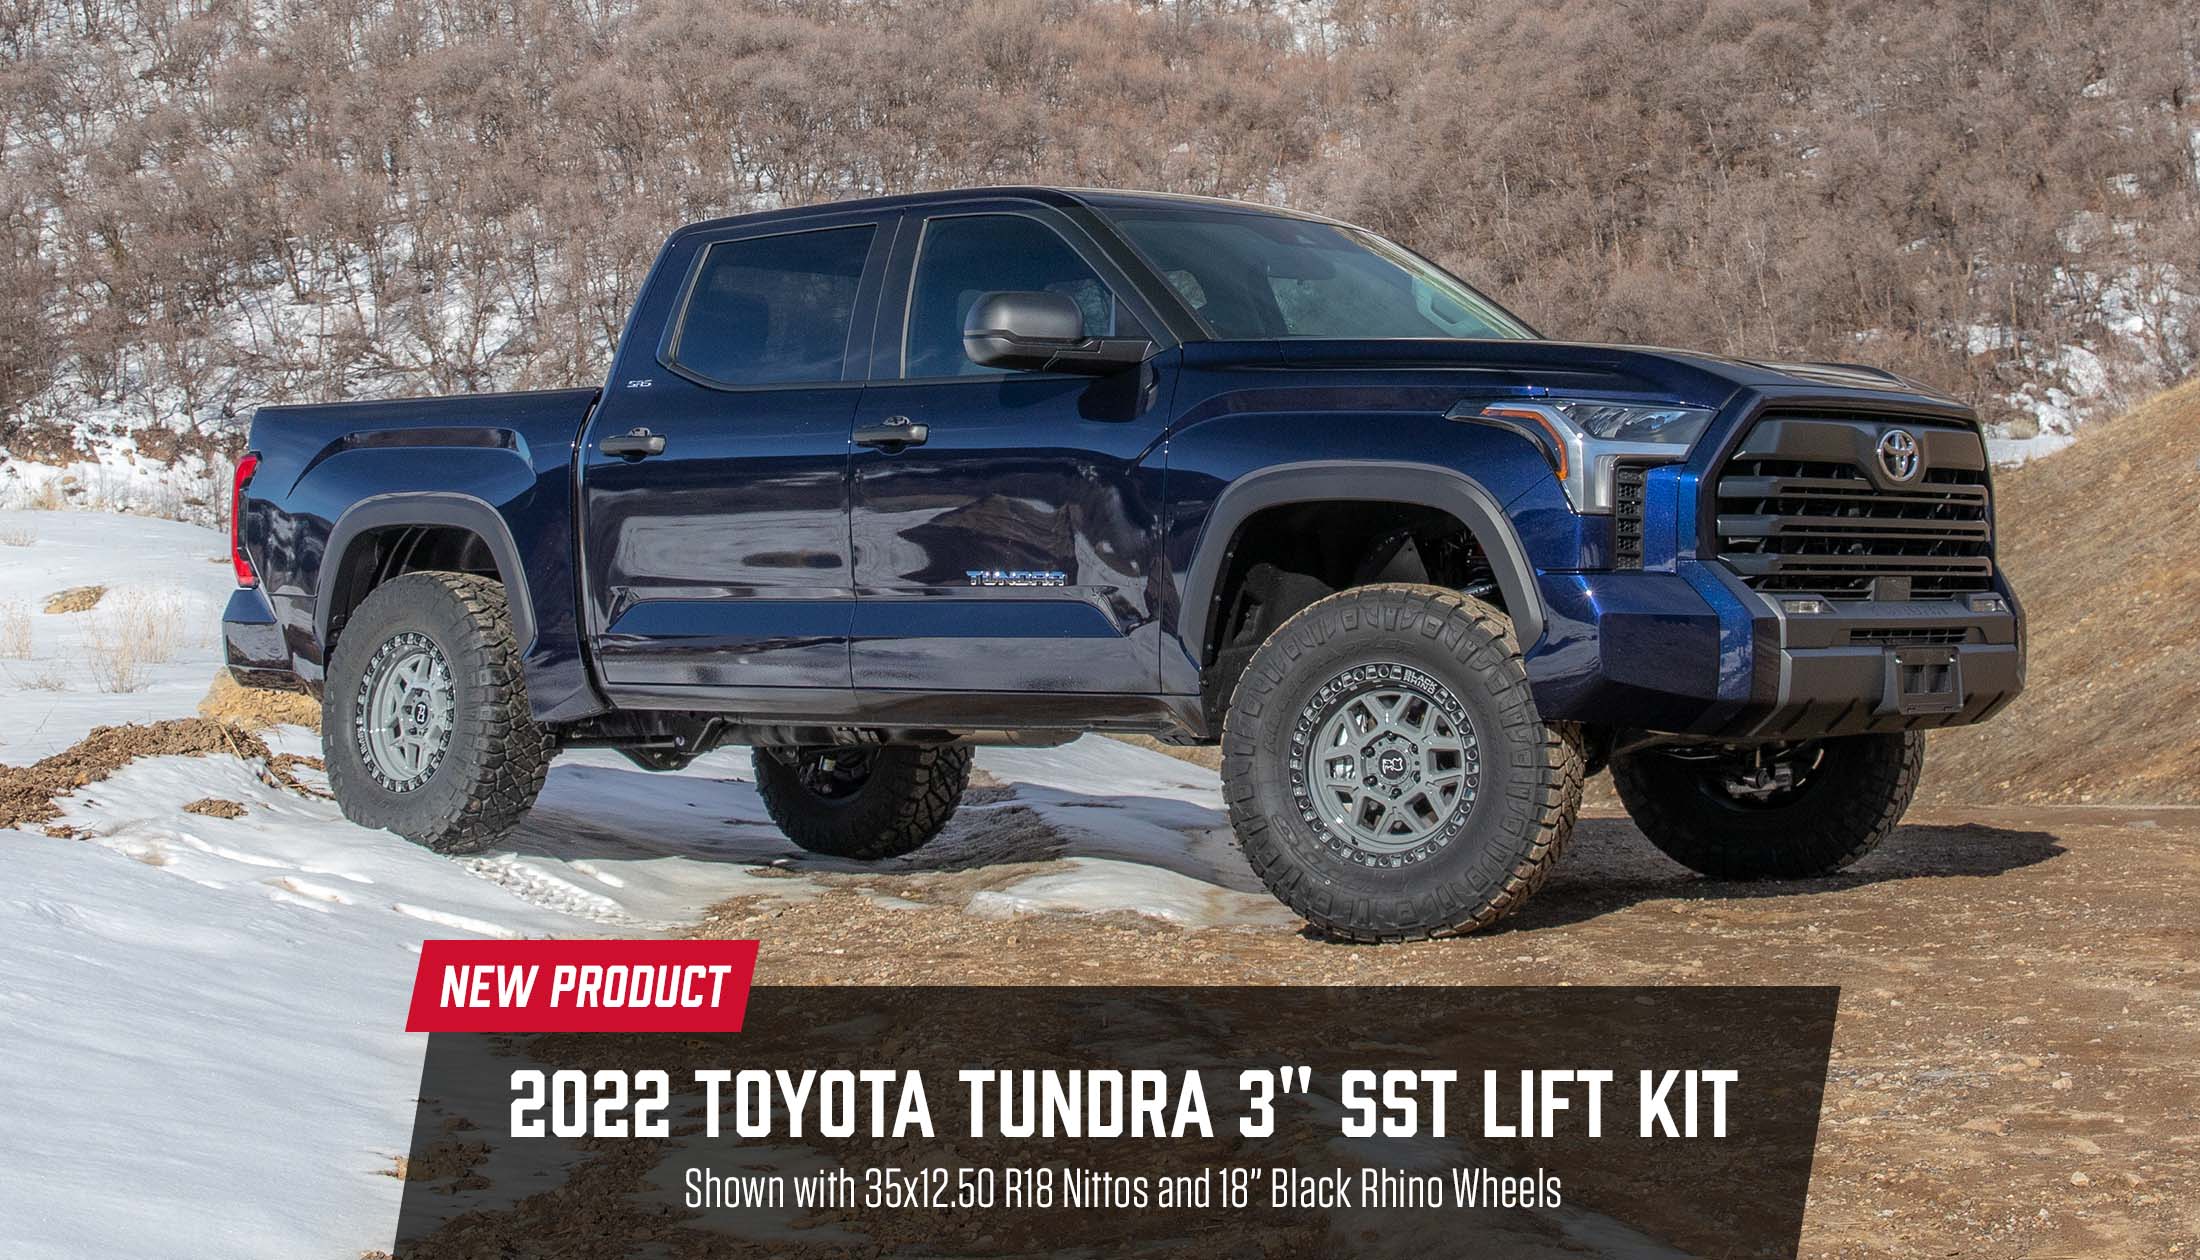 ReadyLIFT Introduces an All-New 3" SST Lift Kit for the New 2022 MY Toyota Tundra Pickups